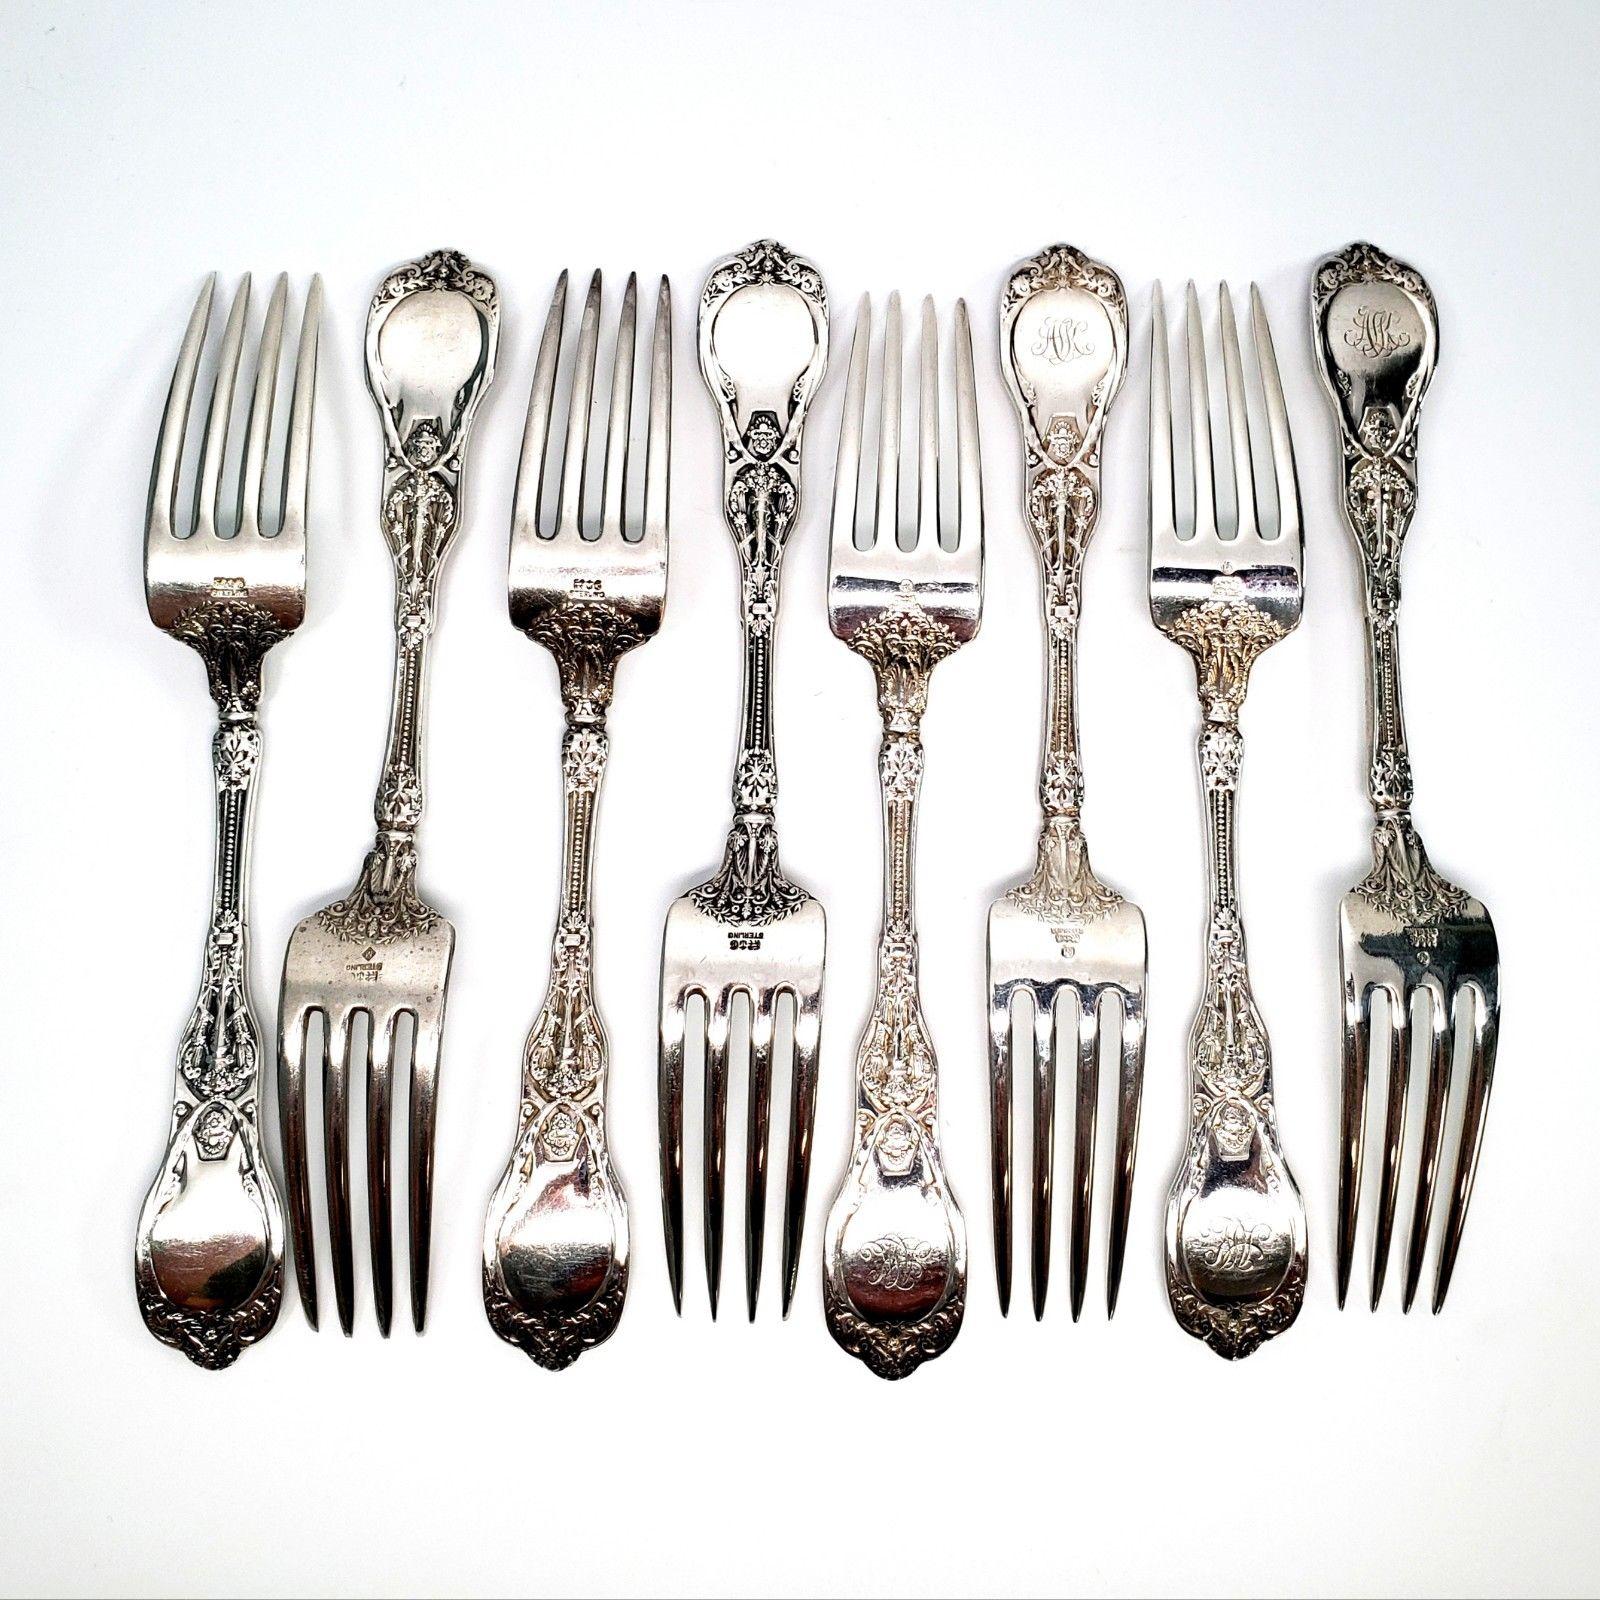 Set of 8 Gorham Mythologique sterling silver Forks. 
Mythologique is a multi motif pattern, this one is the old no bead border, no face bowl. 
Multiple monograms: 4 have no monogram, 4 appear to be ALK. 
Measures approximate 7 1/8